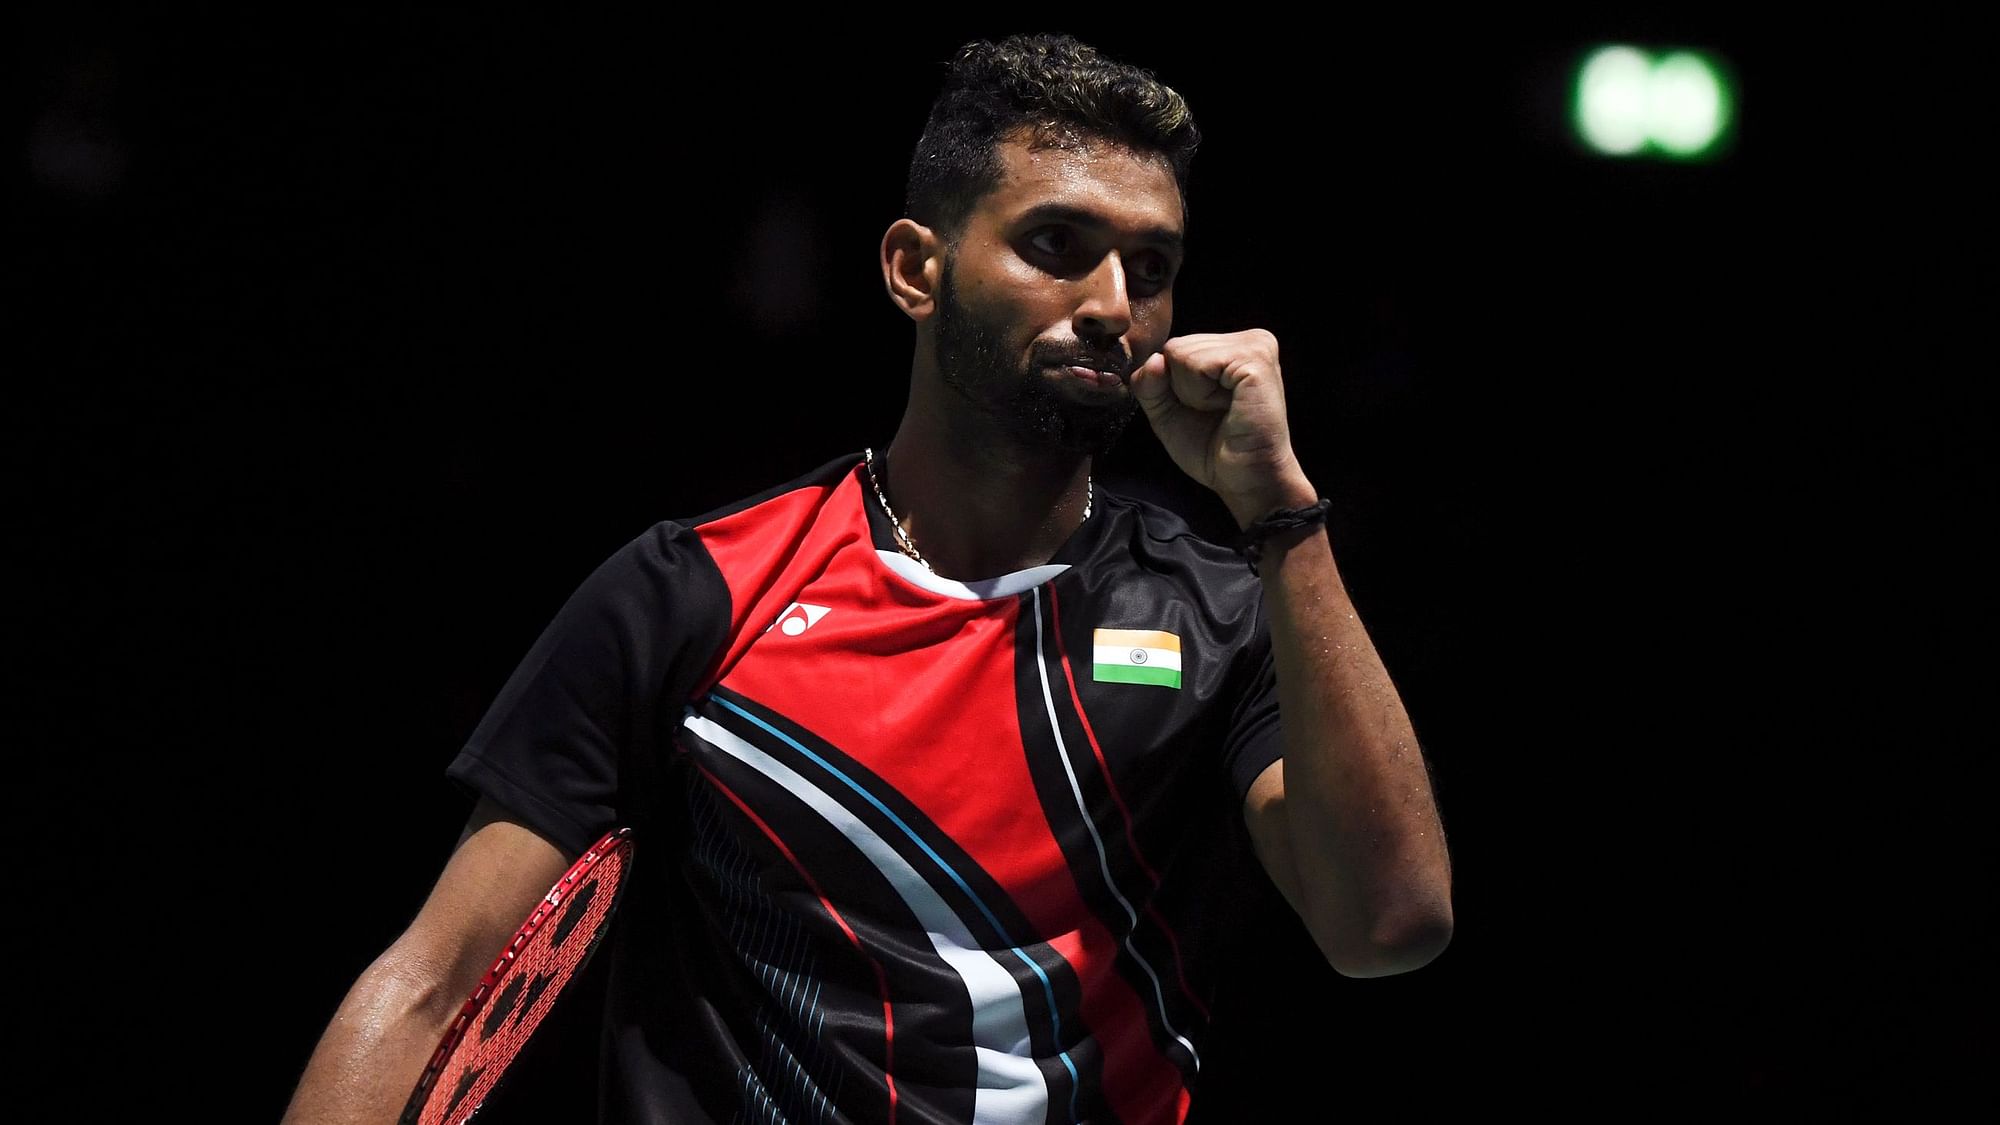 HS Prannoy is among four Indian badminton players who had been reported to have tested positive for COVID-19.